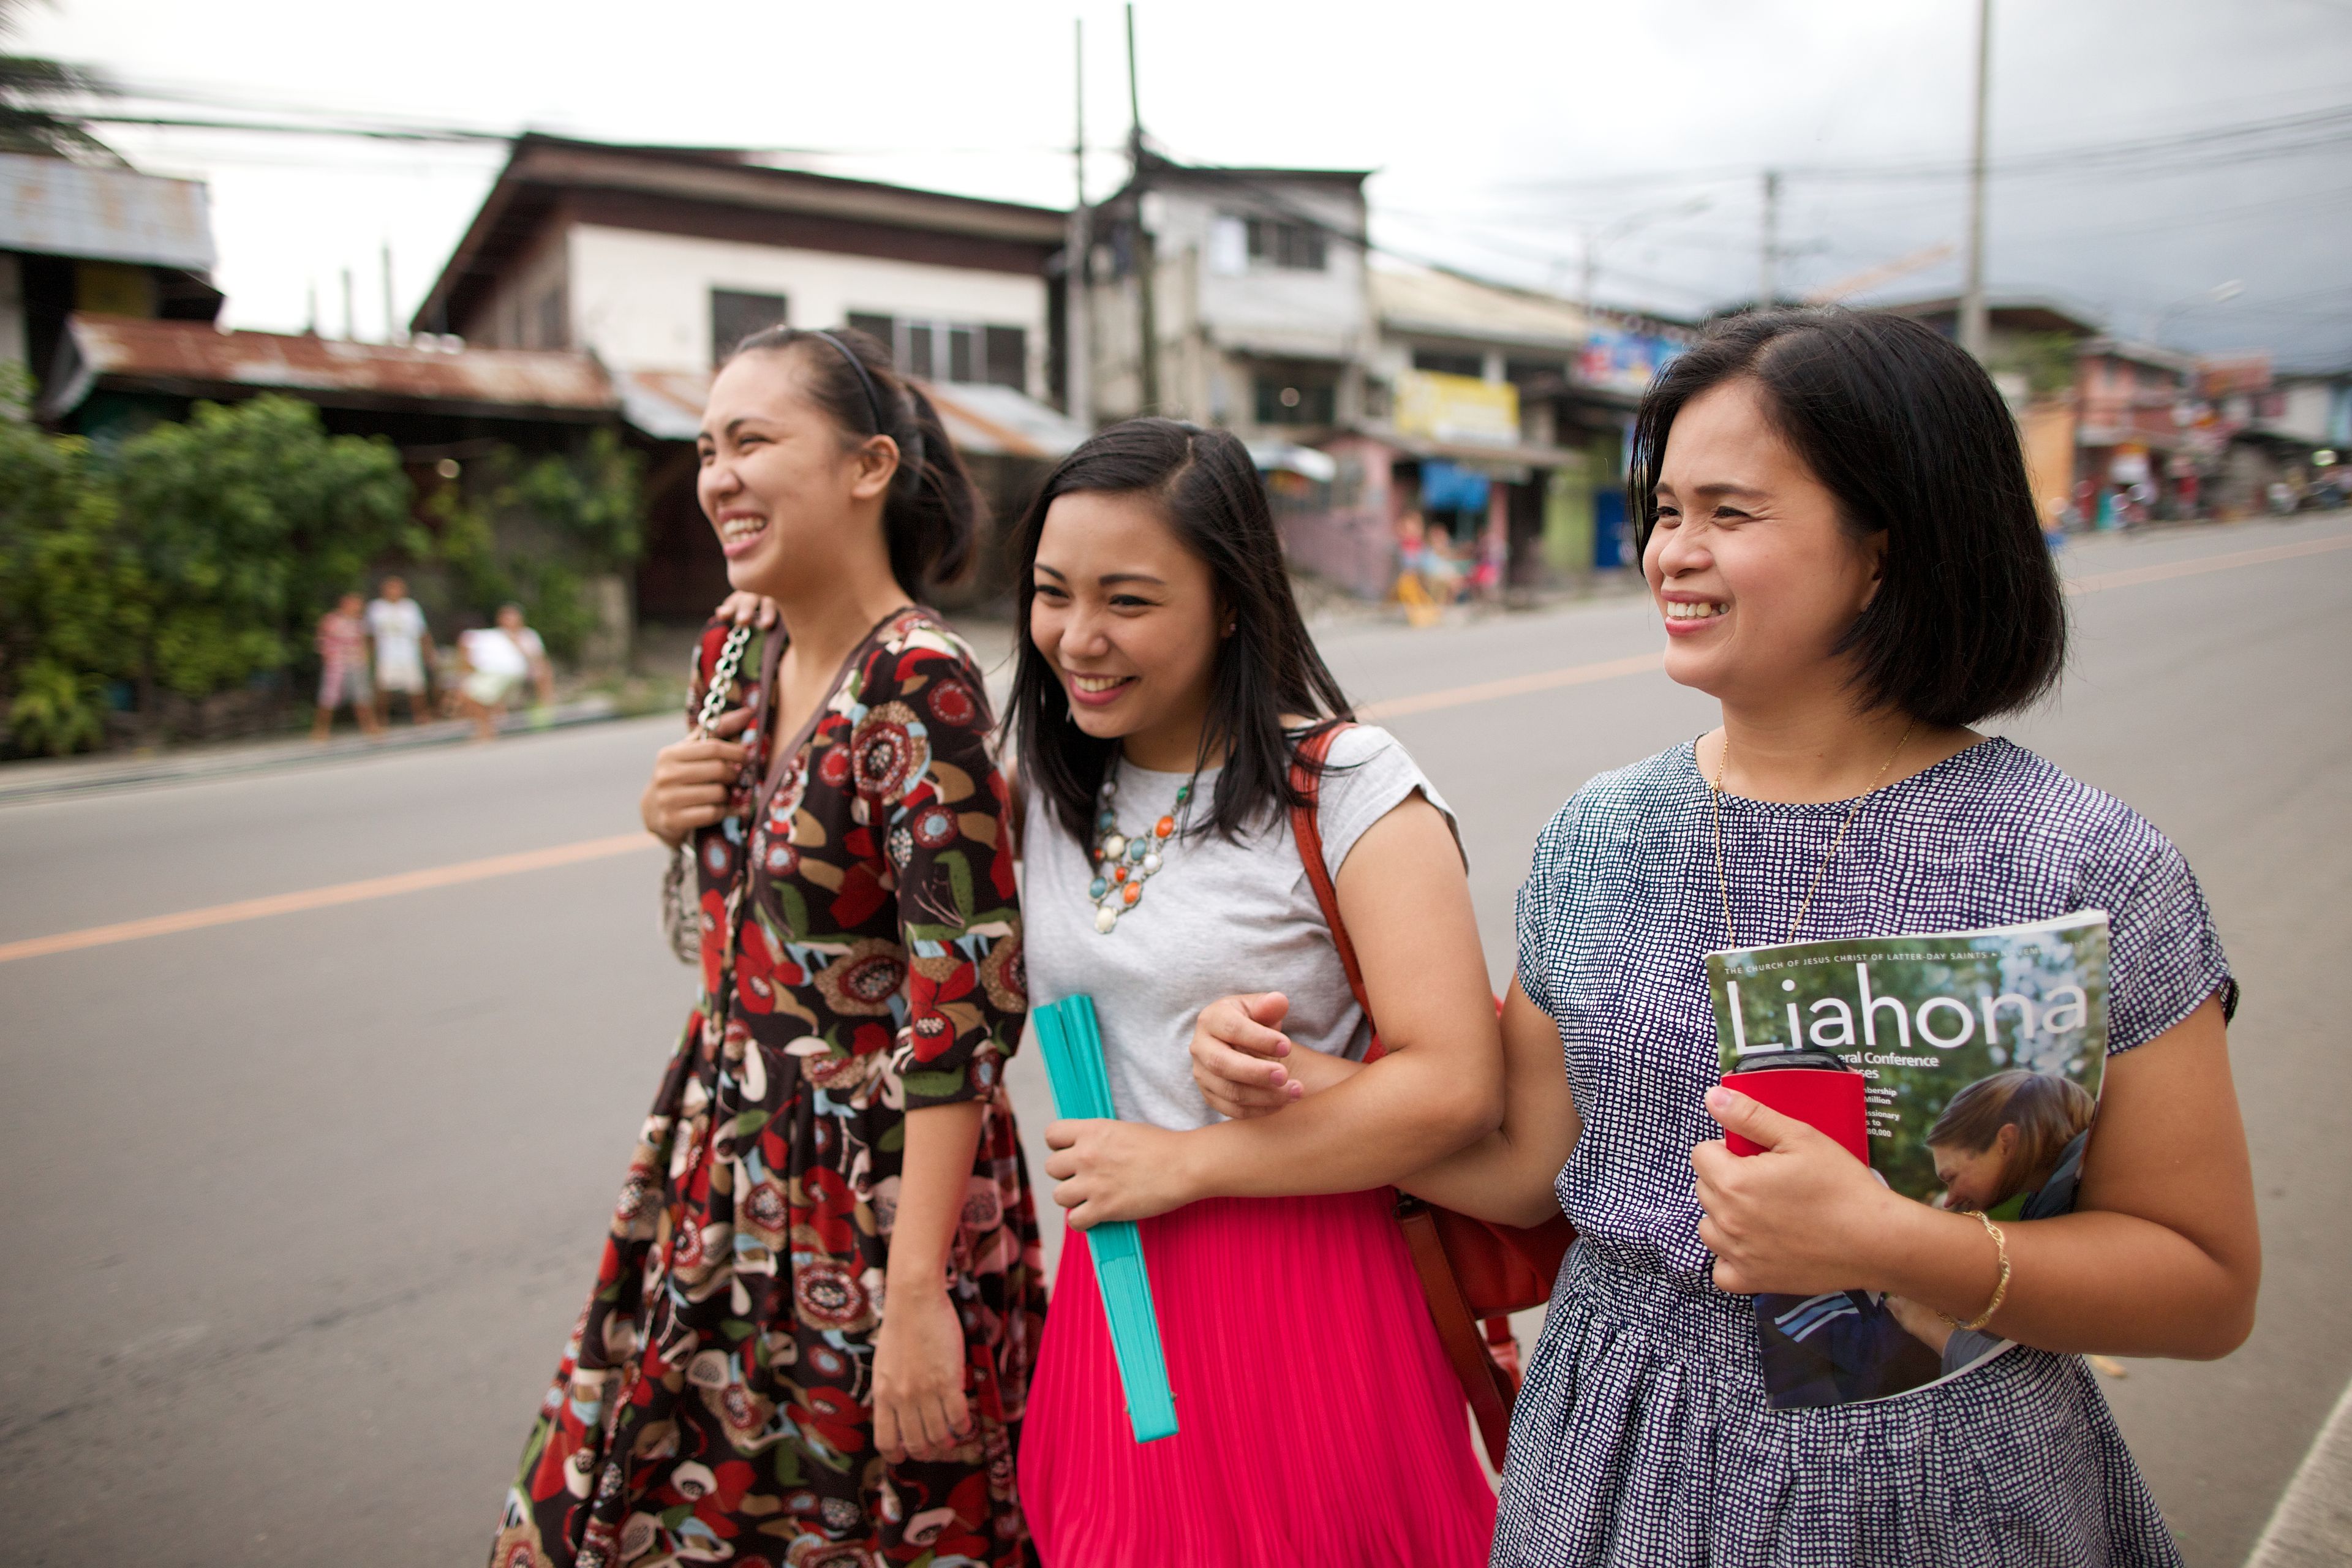 Three young women from the Philippines, wearing dresses and skirts, walking down the street.